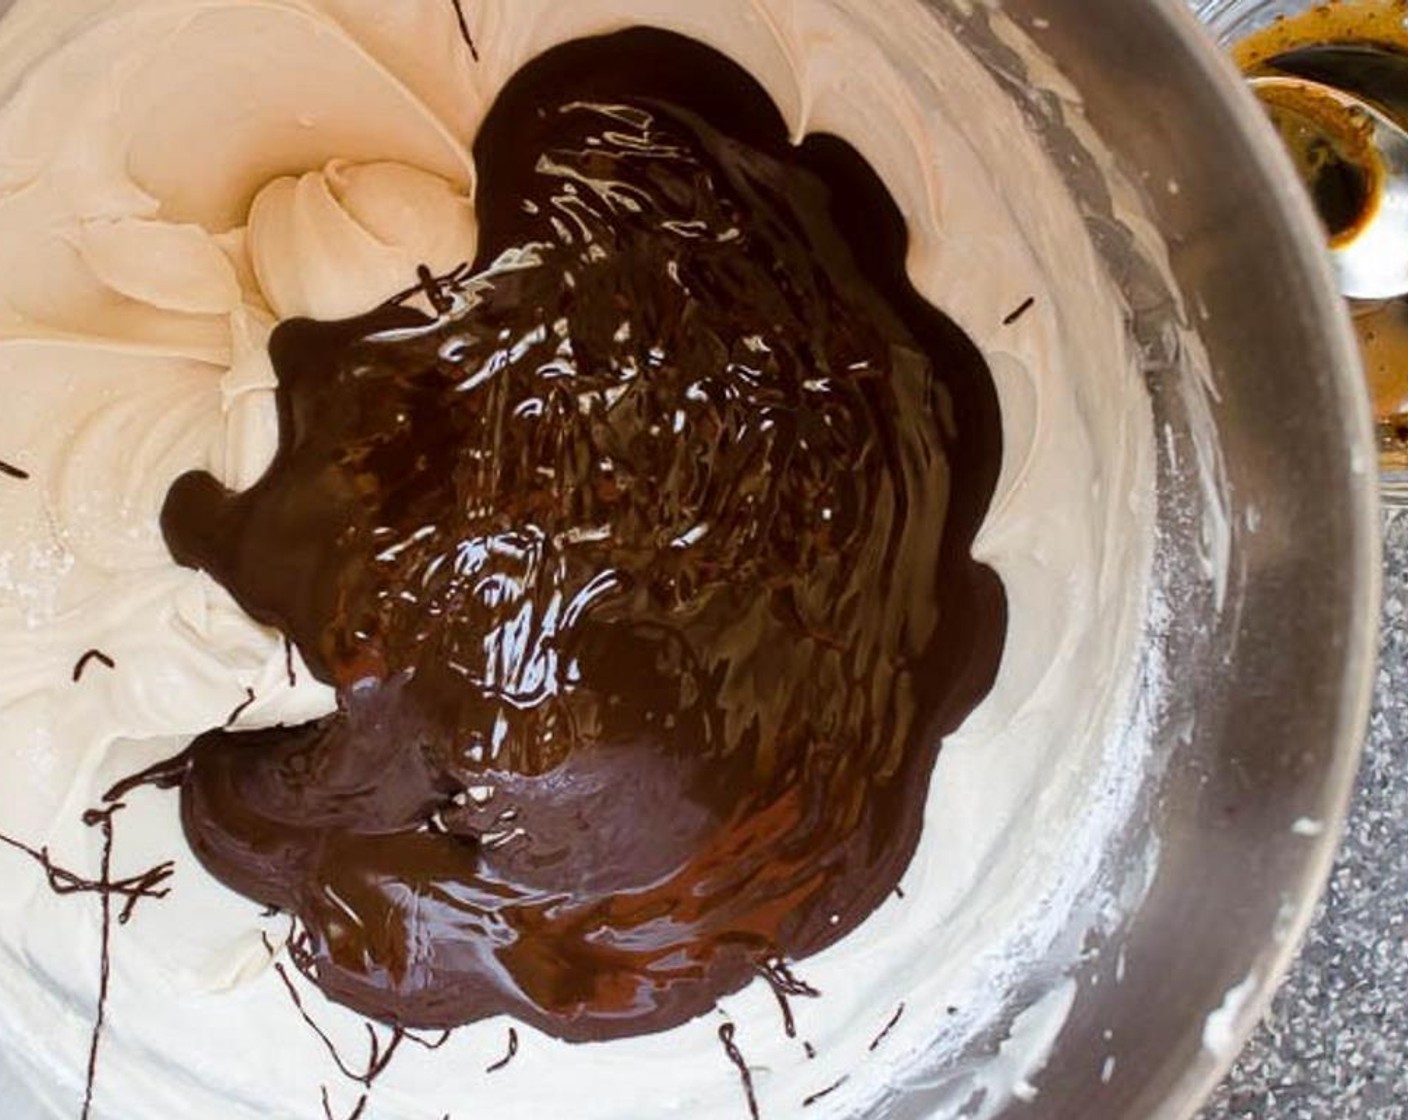 step 10 In a large bowl, beat the Butter (1 cup) until light and airy. Beat in the Vanilla Extract (1 tsp) and Powdered Confectioners Sugar (2 cups) until smooth. Add melted chocolate and instant espresso in water and beat until well combined.